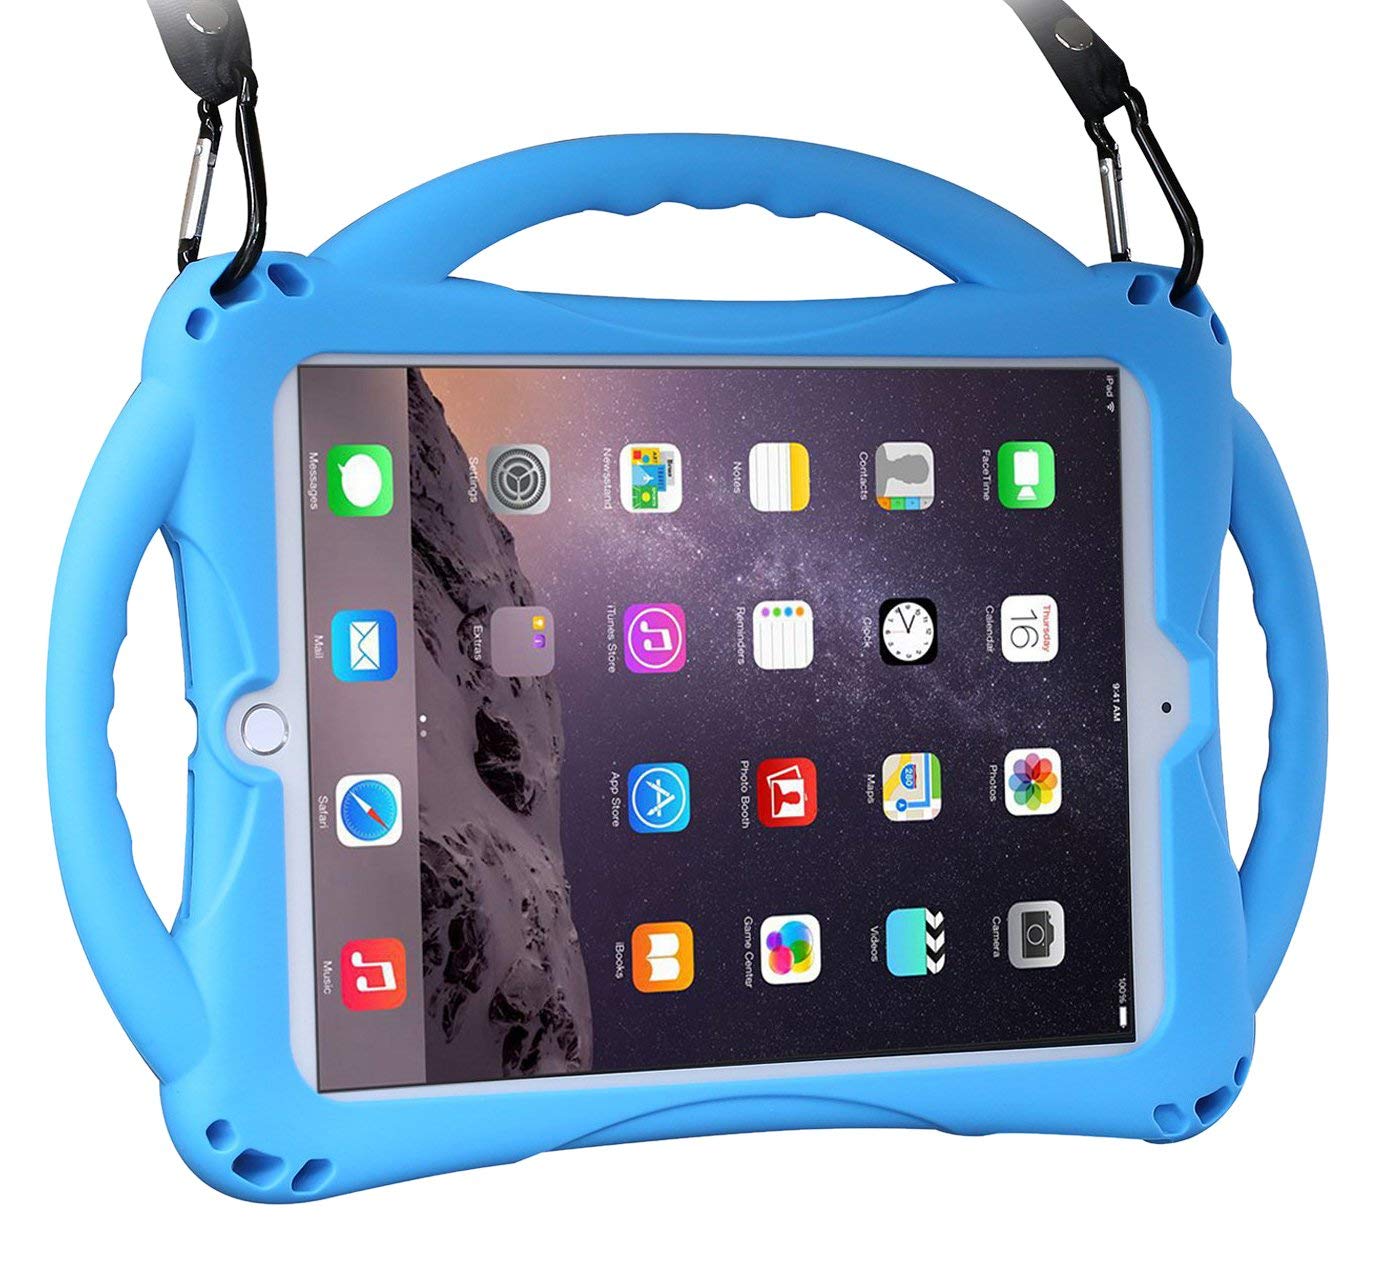 New iPad 2017/2018 9.7 inch Case/iPad Air Case, TopEsct Shockproof Silicone Handle Stand Case Cover & (Tempered Glass Screen Protector) For Apple New iPad 9.7inch(2017/2018 Version) and iPad Air(Blue)